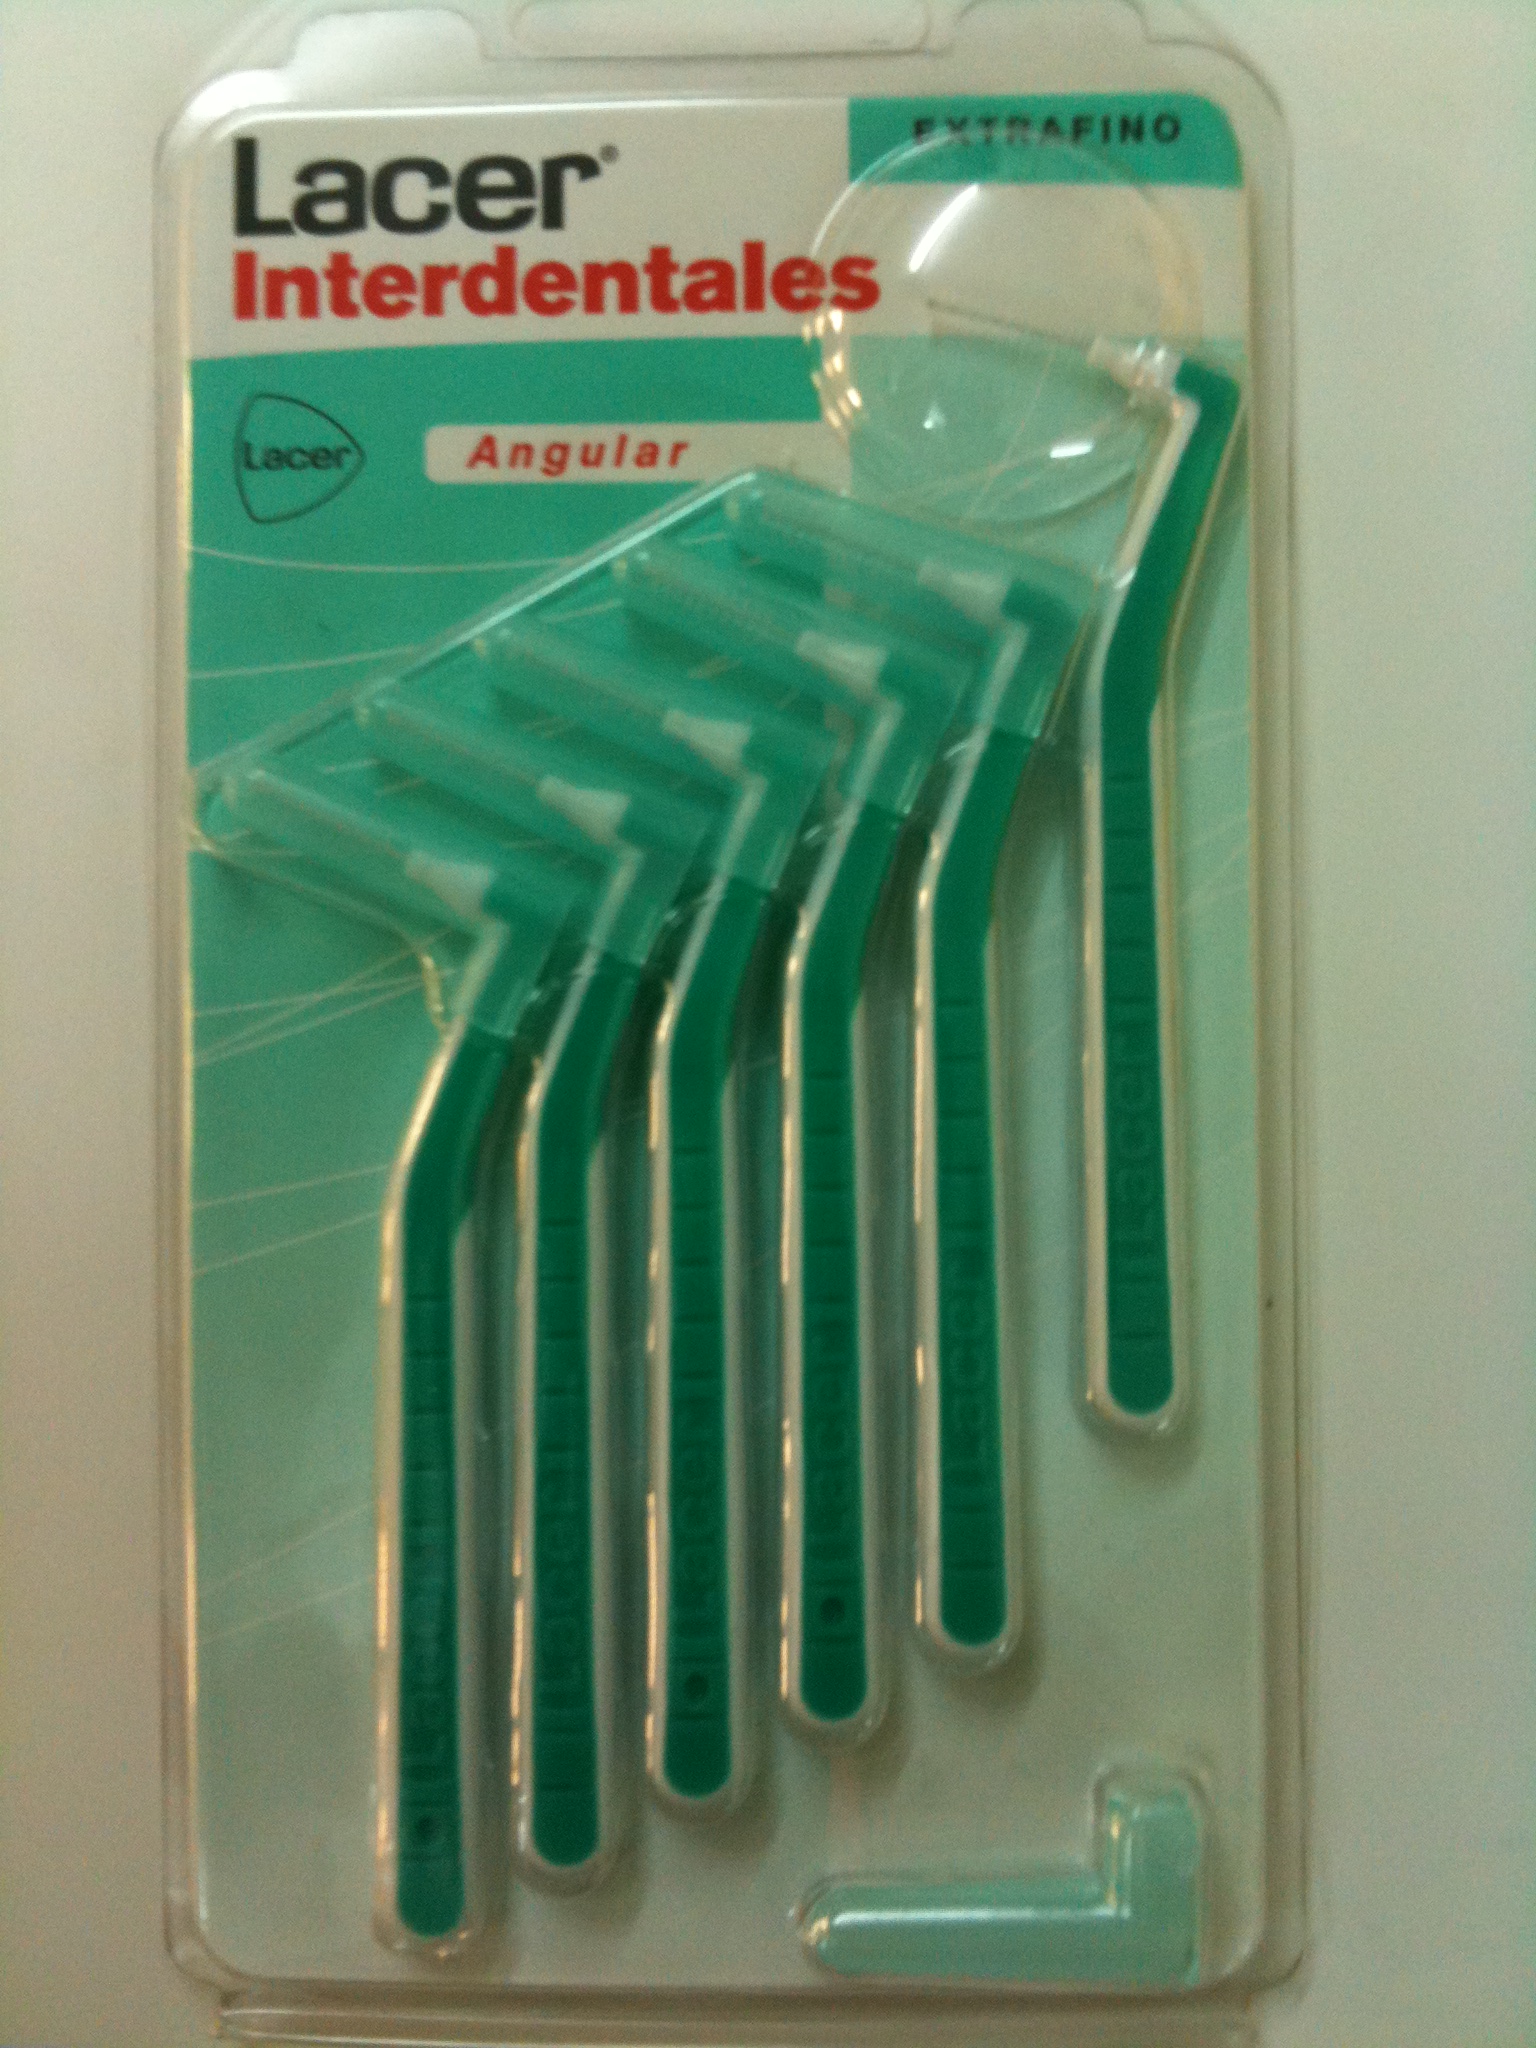 LACER INTERDENTAL EXTRA FINE 90º BOX WITH 6 UNITS